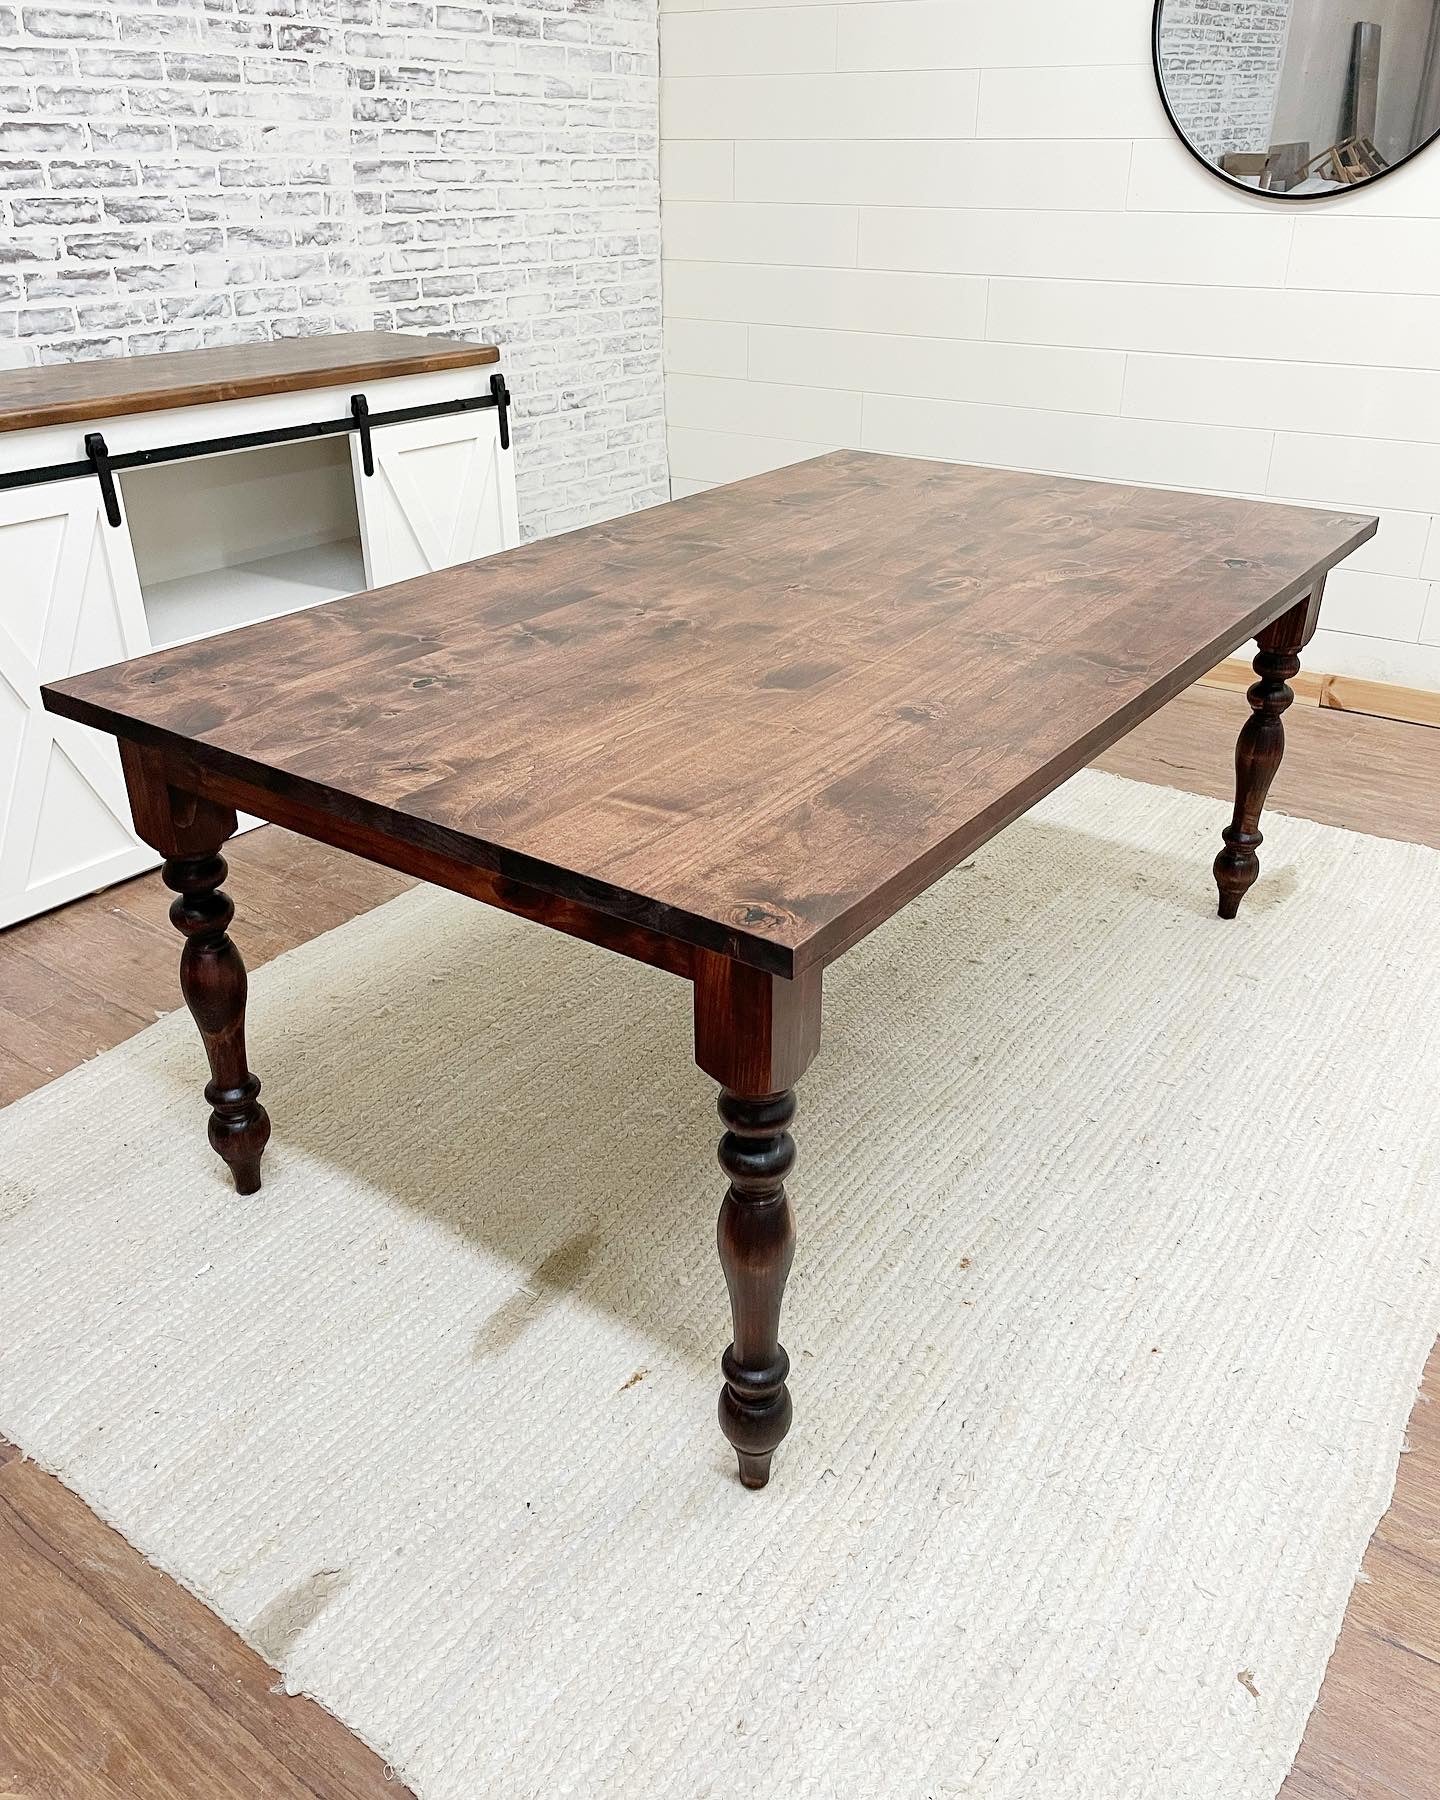 Pictured with a 6' L x 42" W Rustic Alder Top and Pine Legs stained a custom Red Mahagony stain.